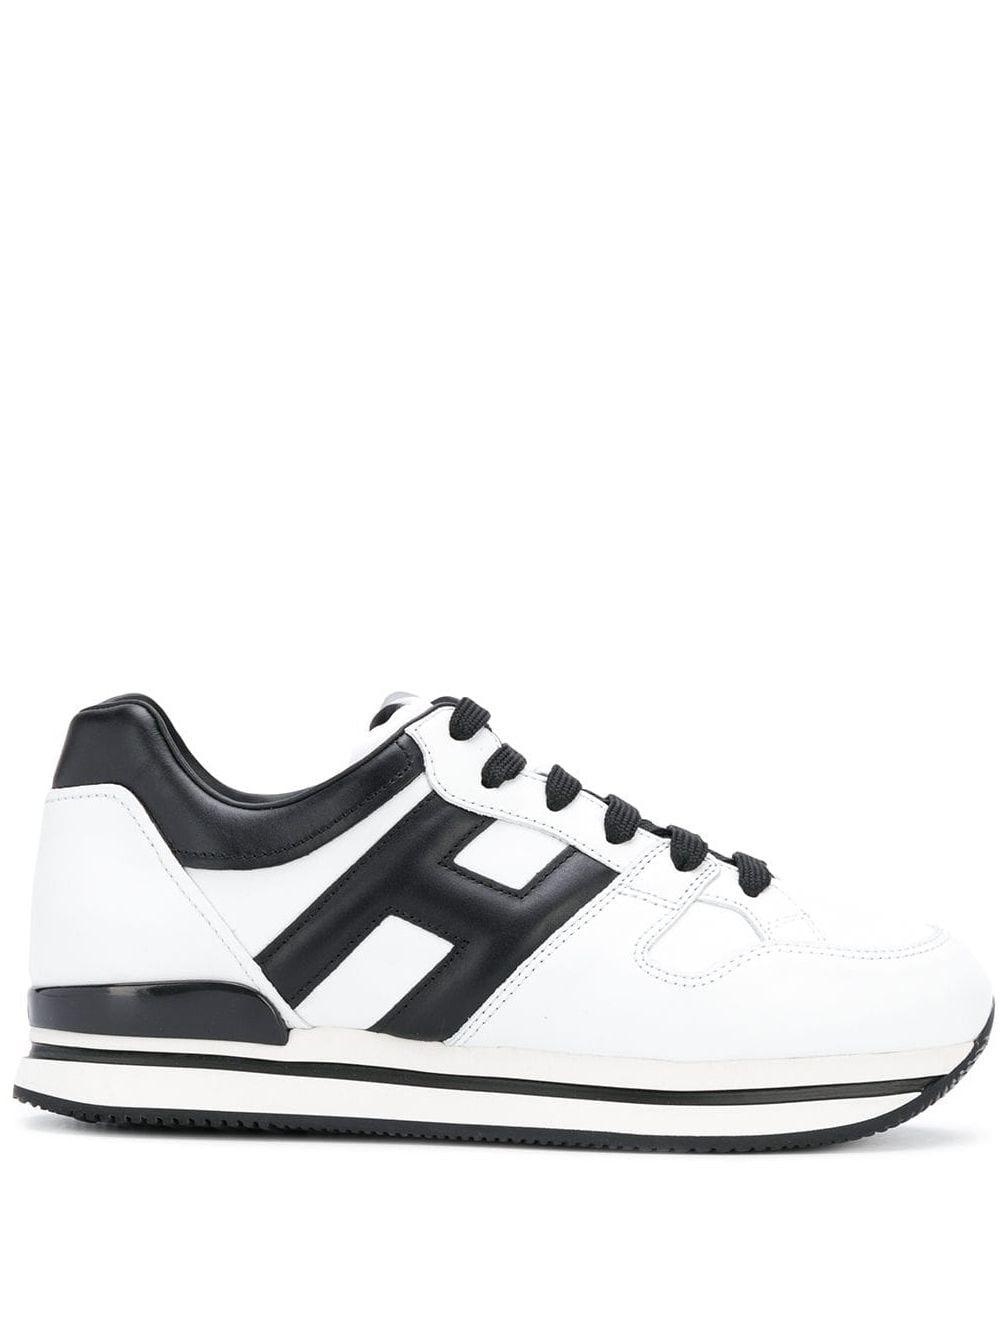 Hogan H222 Black And White Leather Sneakers - Save 65% - Lyst